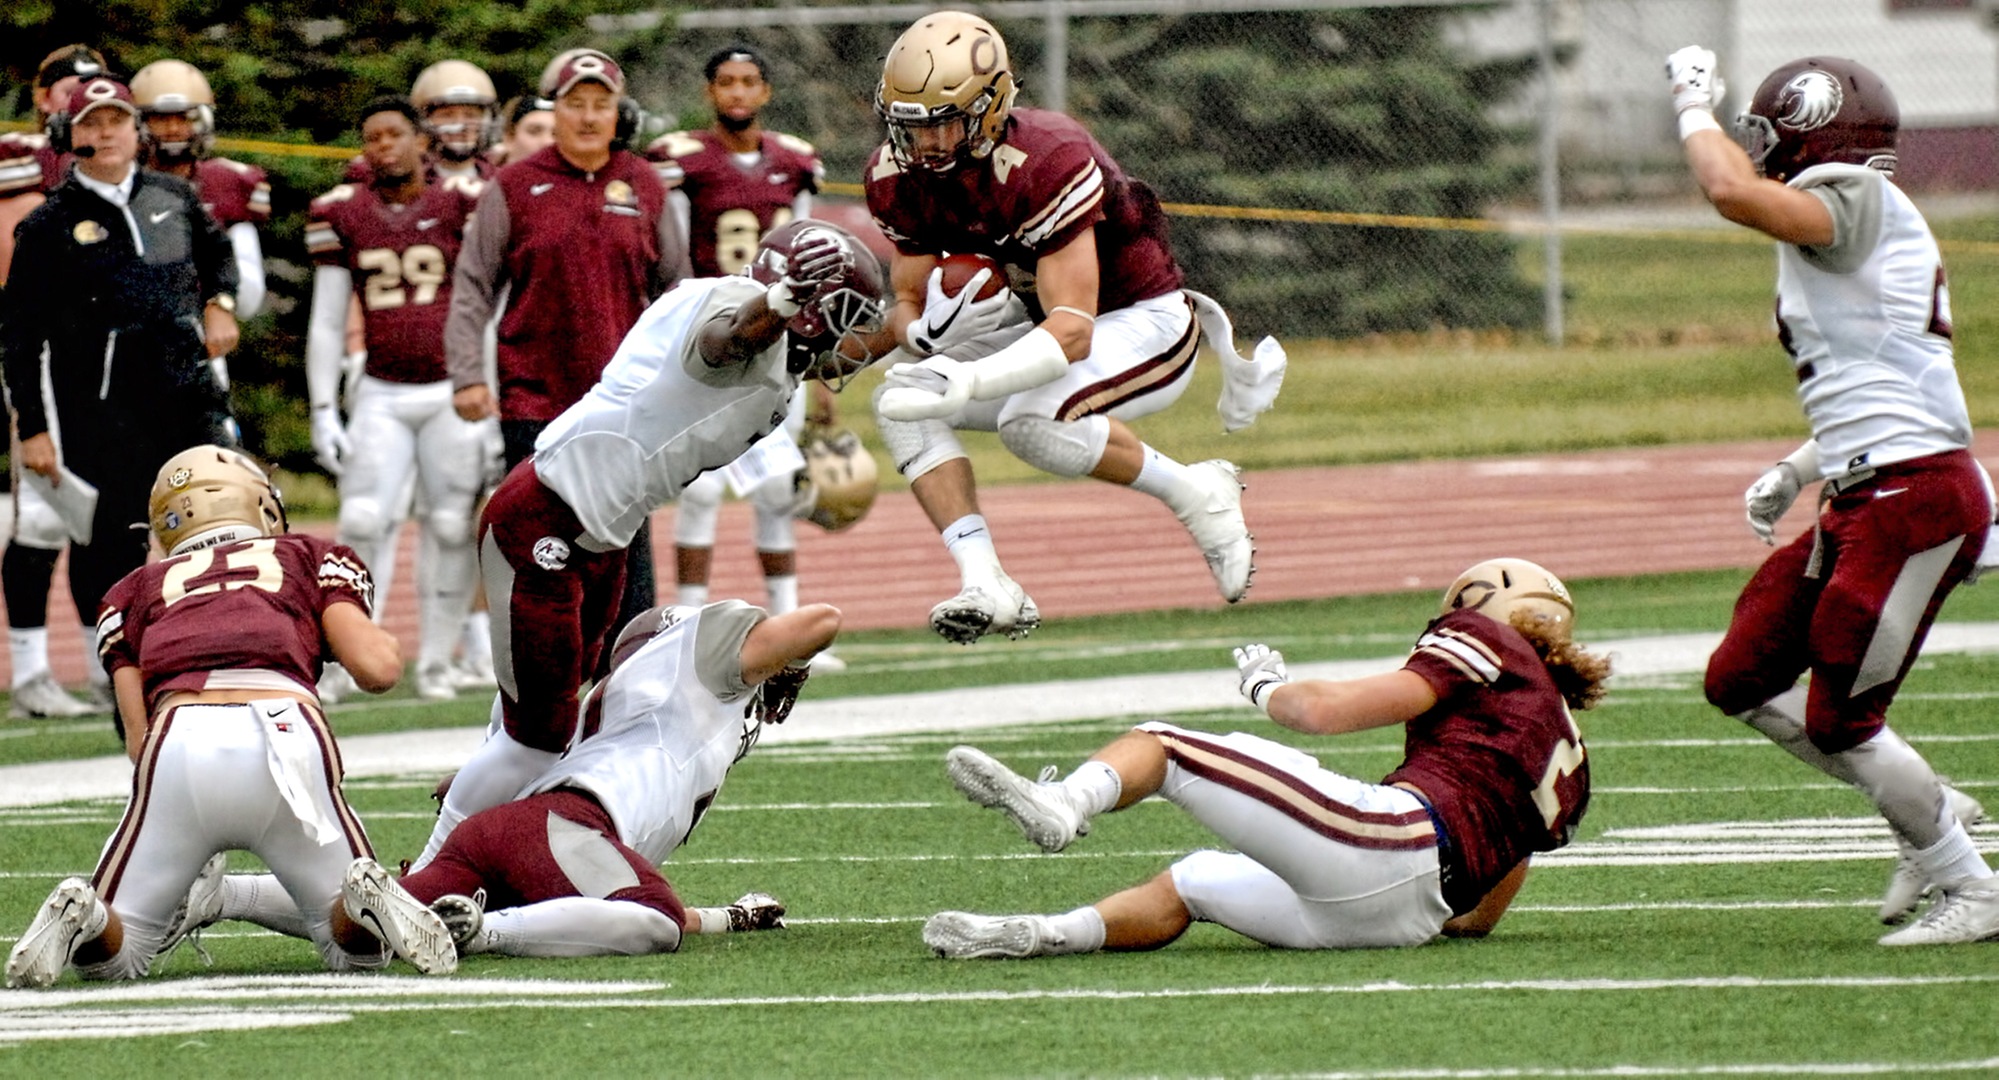 Senior Jason Montoyne flies through the air during one of his nine carries in the Cobbers' 42-20 win over Augsburg.